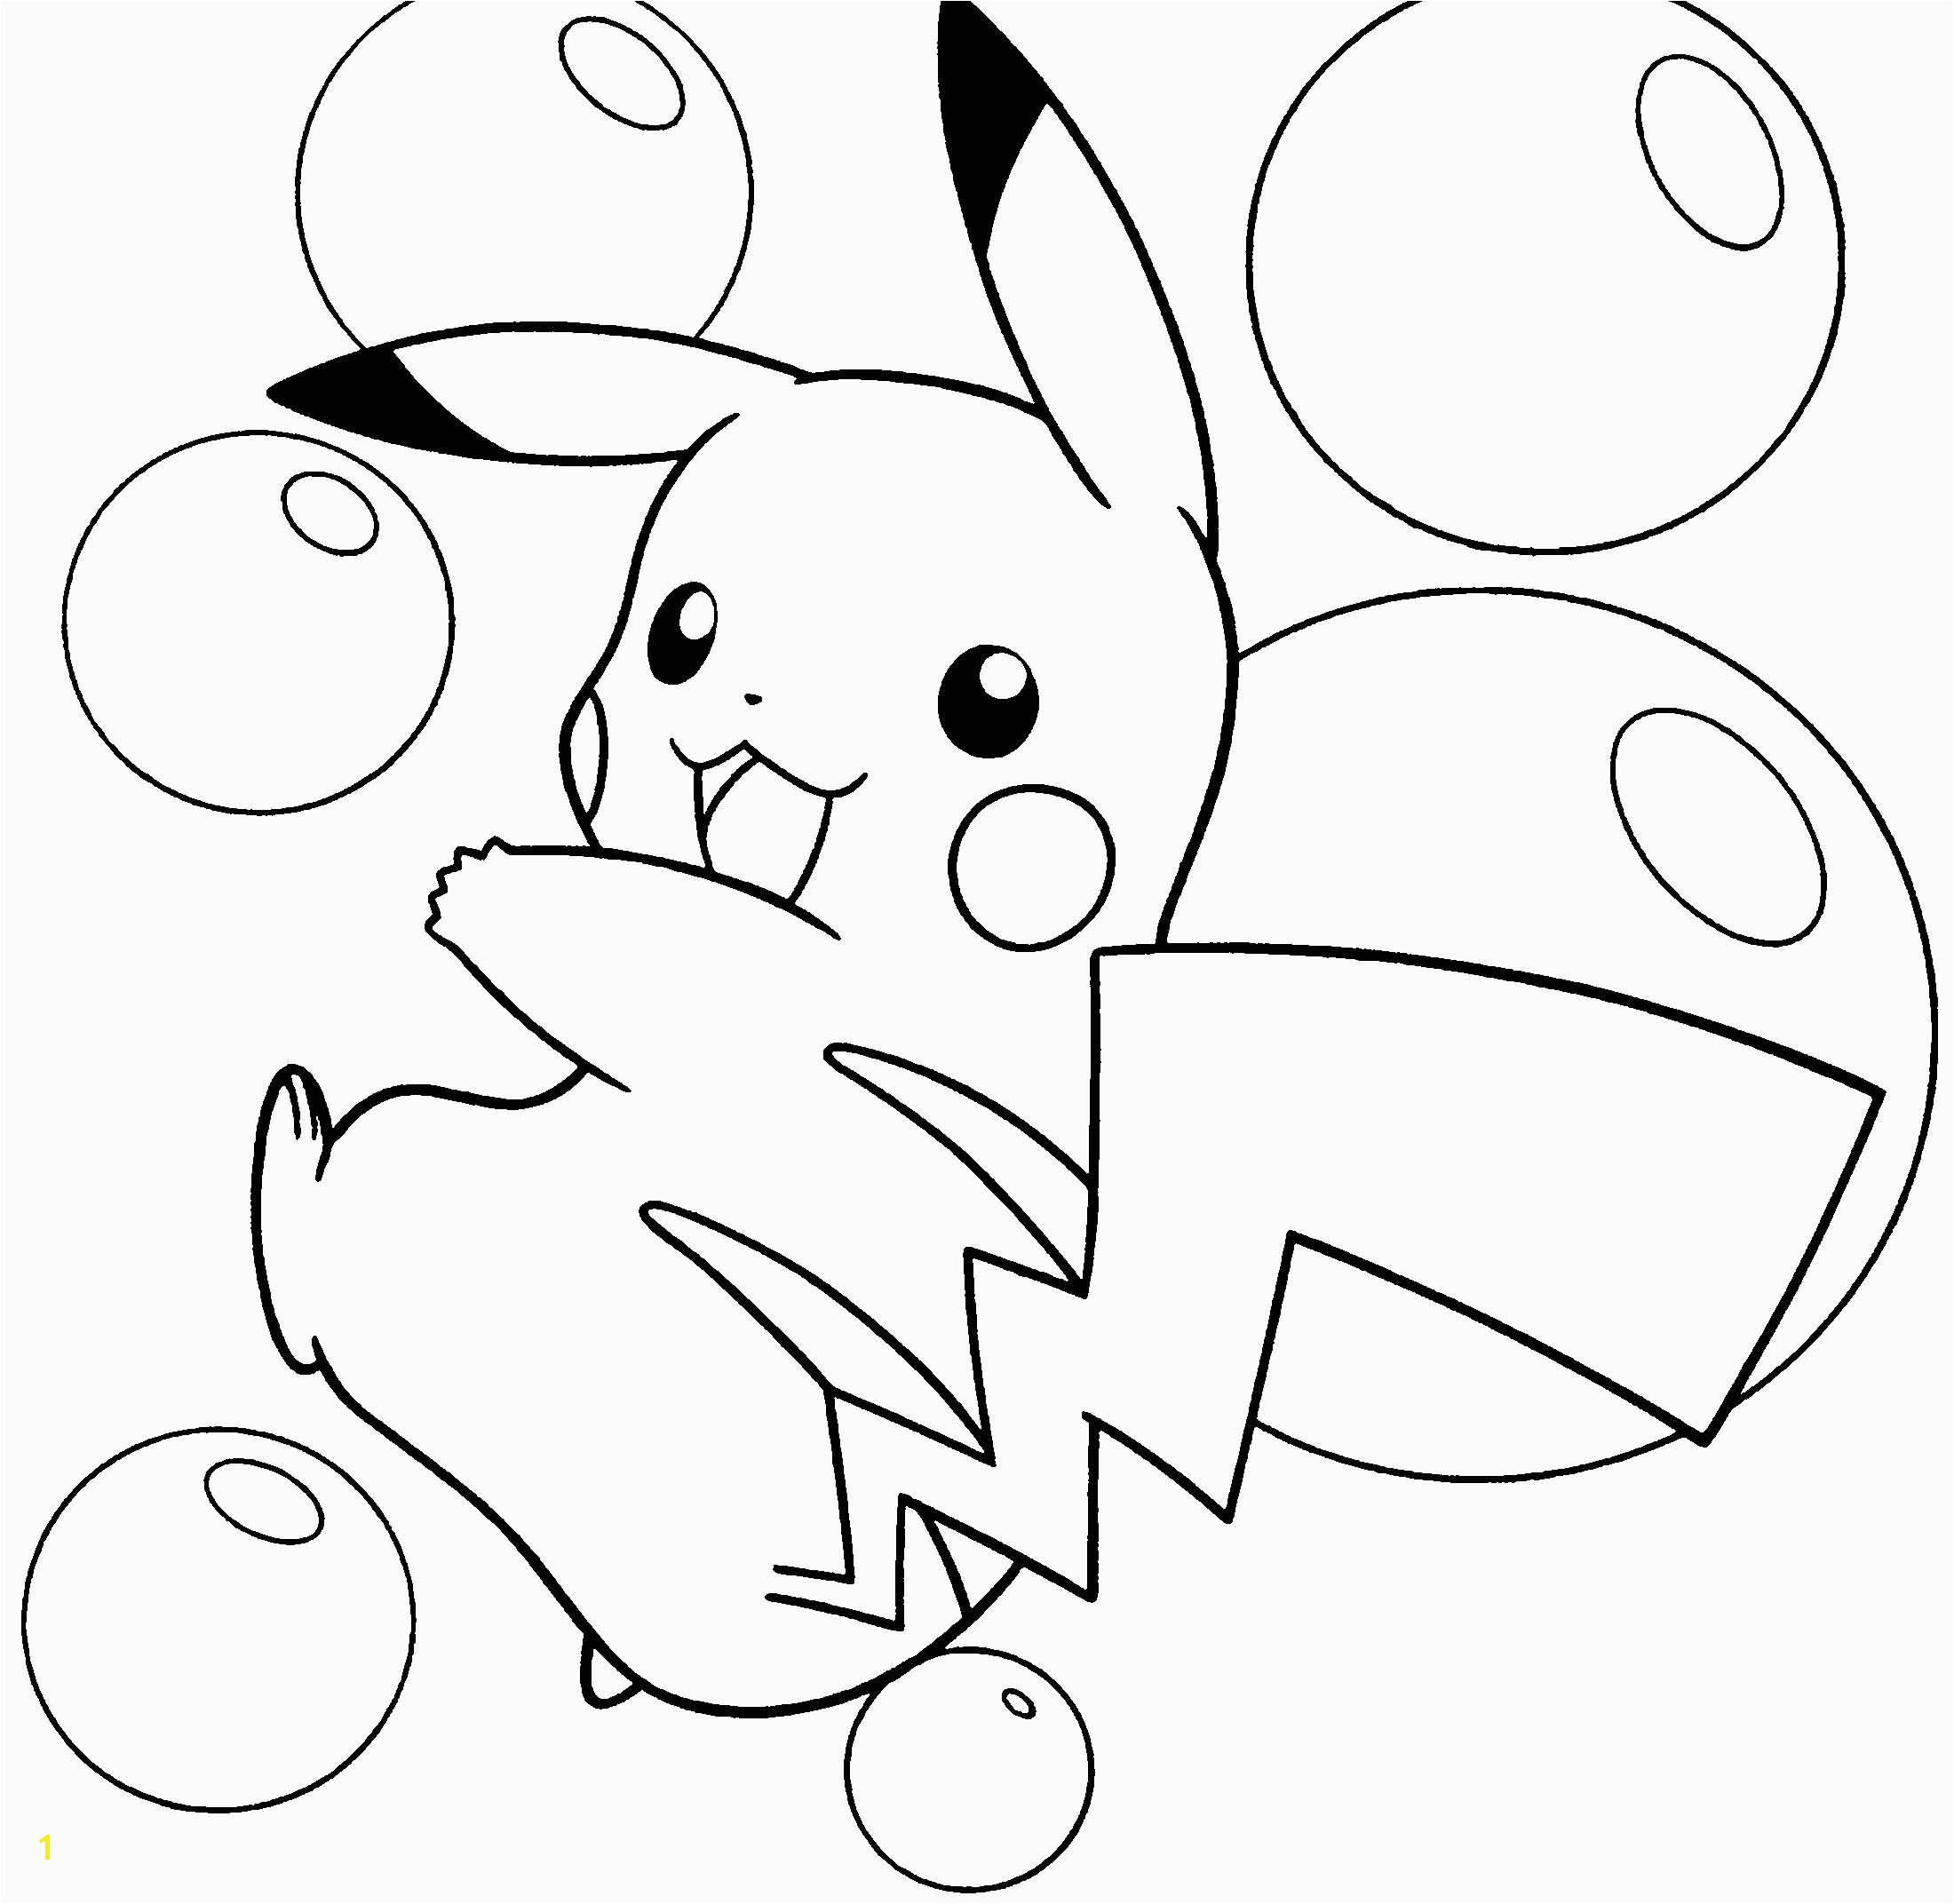 pikachu coloring pages Free